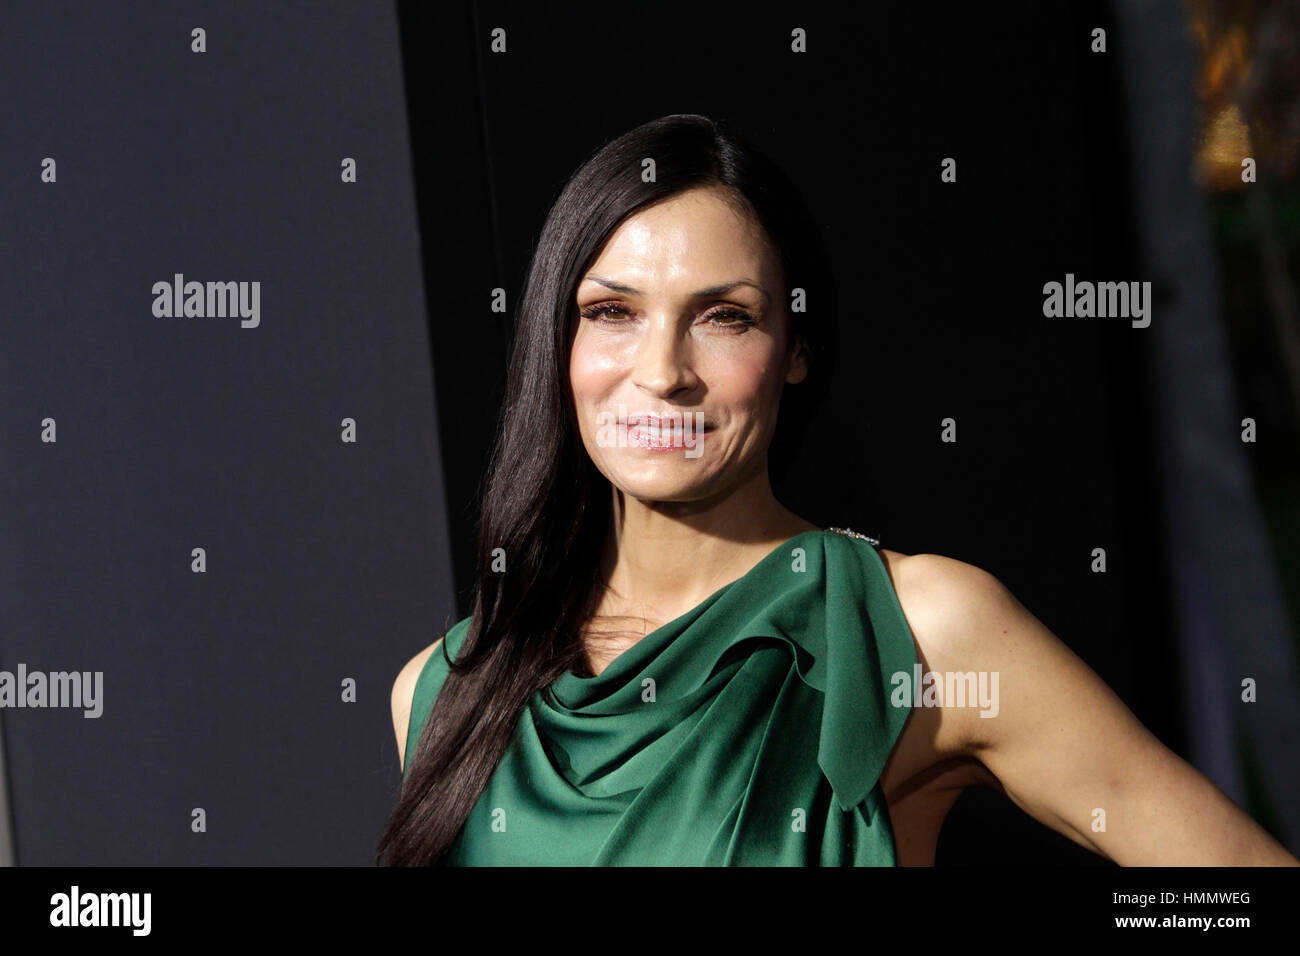 Famke Janssen arrives at the premiere of the film "Hansel & Gretel: Witch Hunters" on January 24, 2013, in Hollywood, California. Photo by Francis Specker Stock Photo